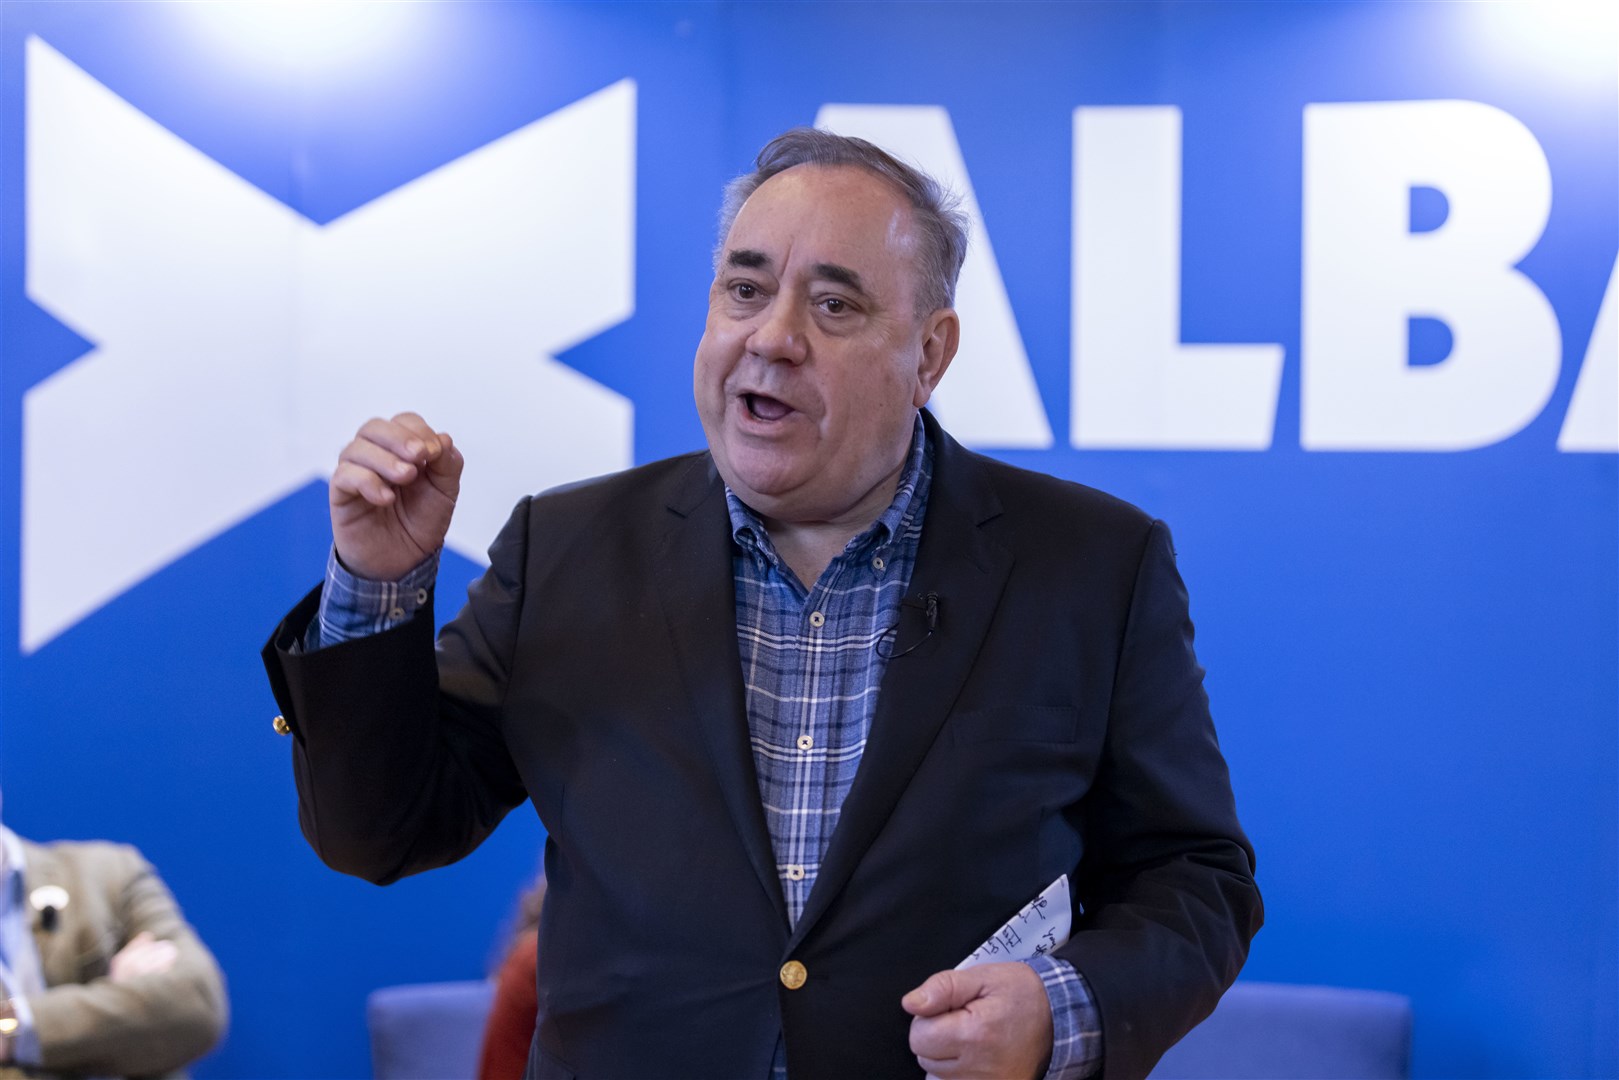 Alex Salmond said his Alba Party could win 24 seats at the next Holyrood elections (Robert Perry/PA)